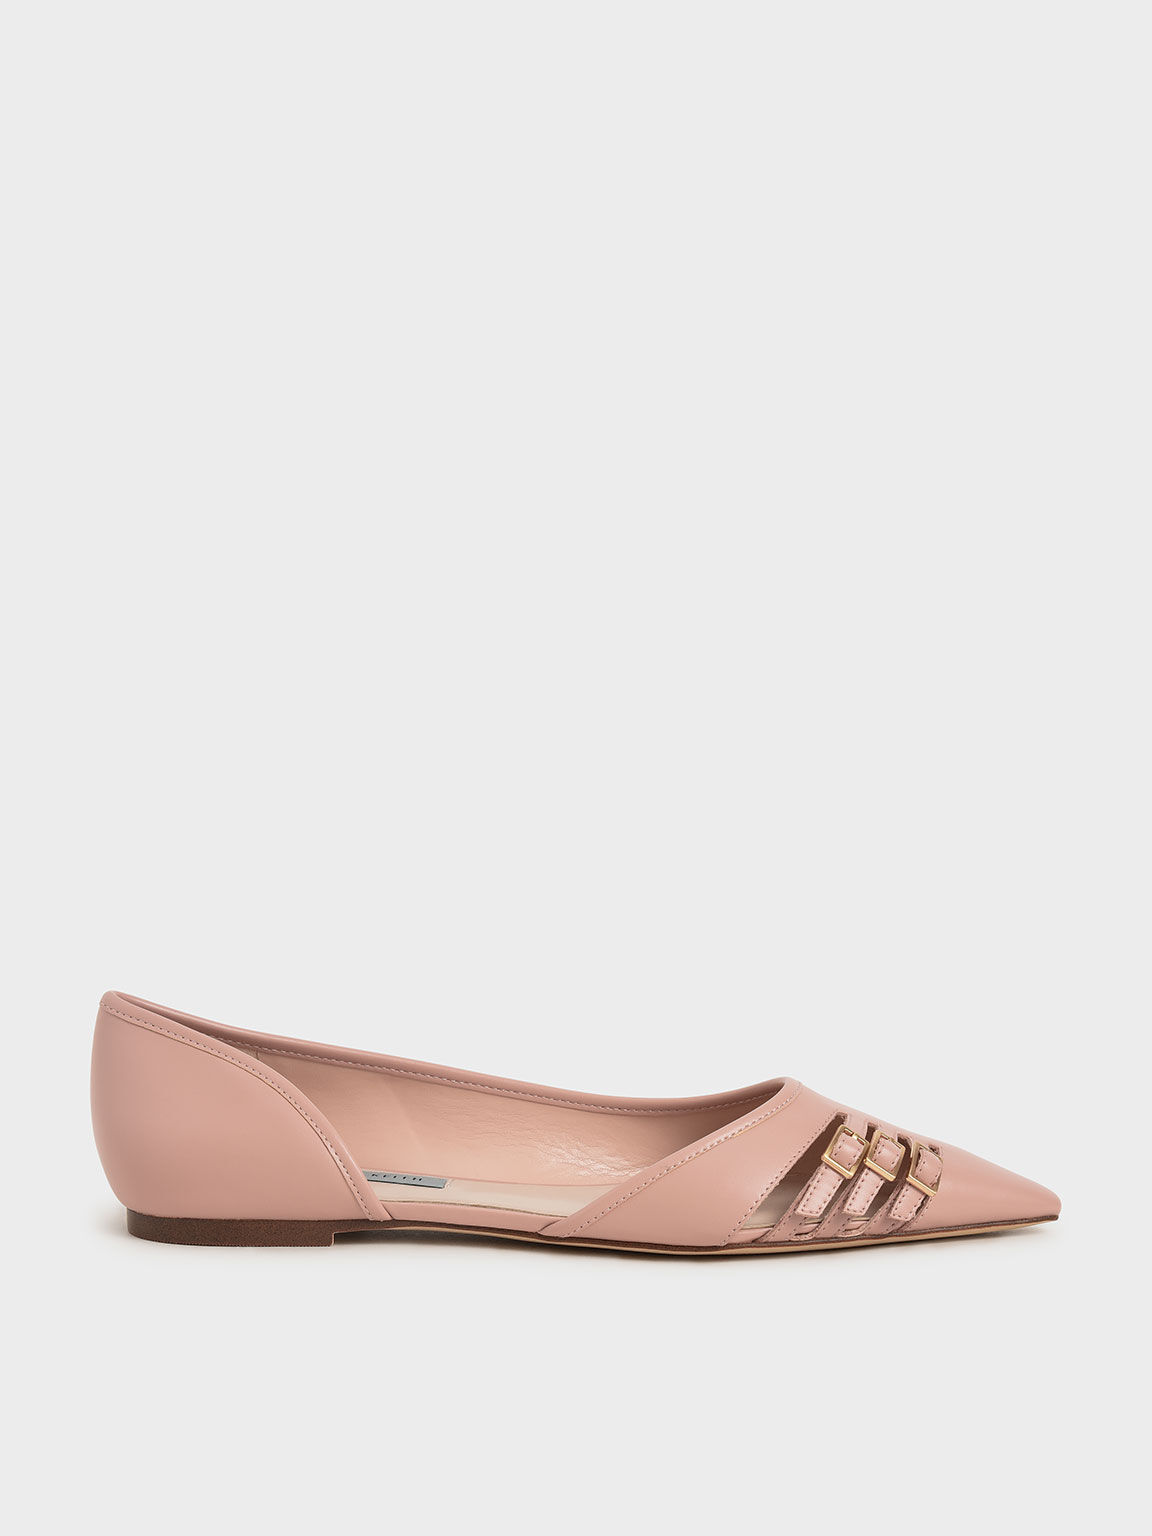 Nude Half D'Orsay Cut-Out Ballerinas - CHARLES KEITH US